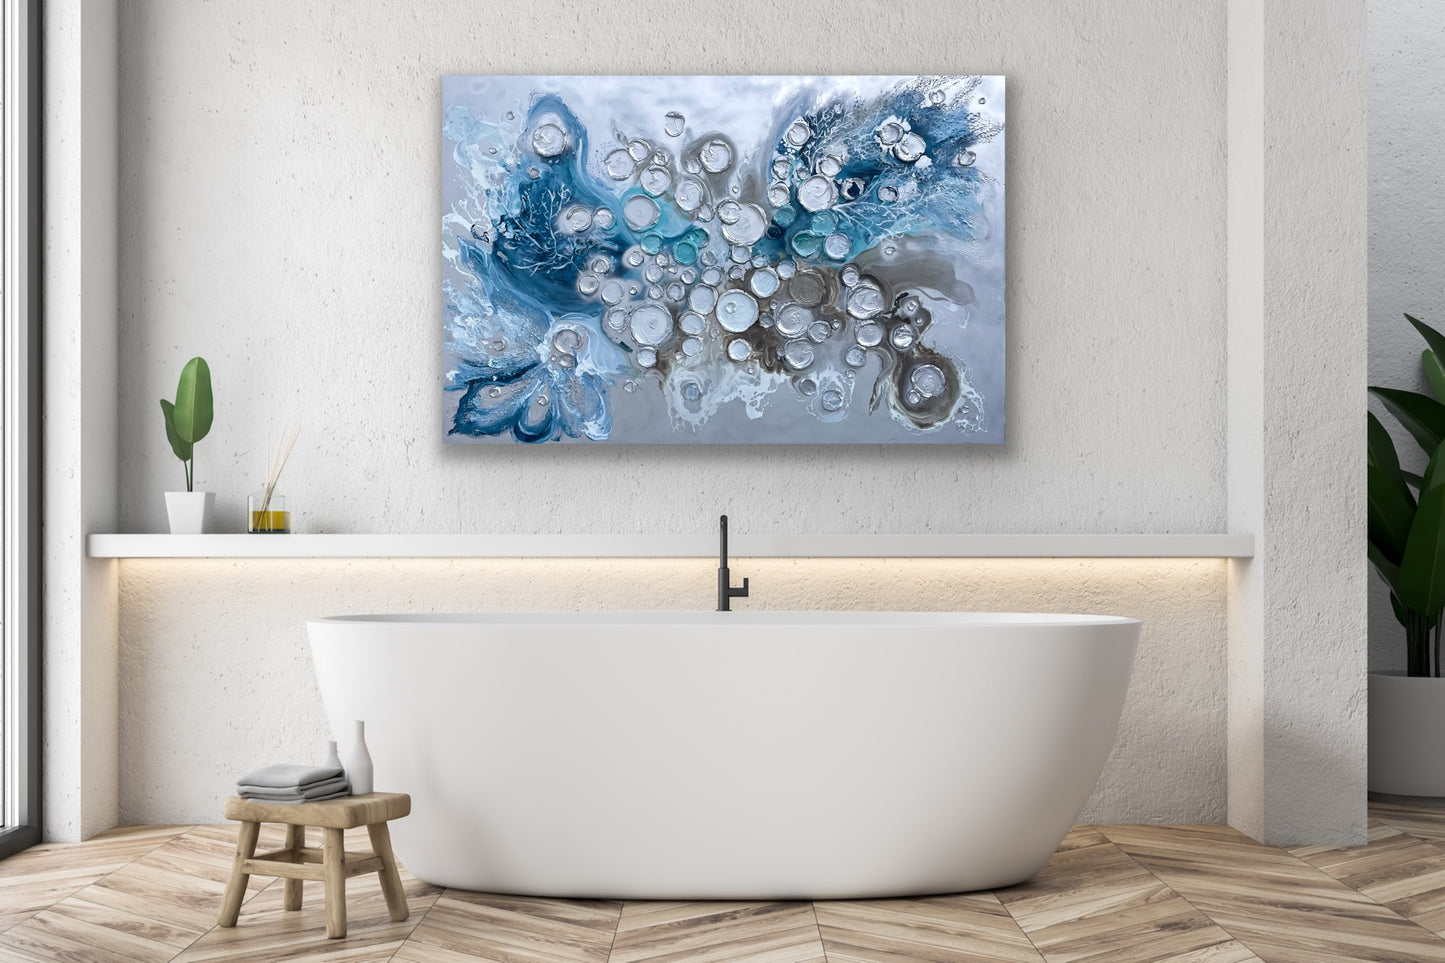 Silver and Blue Barnacles and Corals Painting 40x60 inches